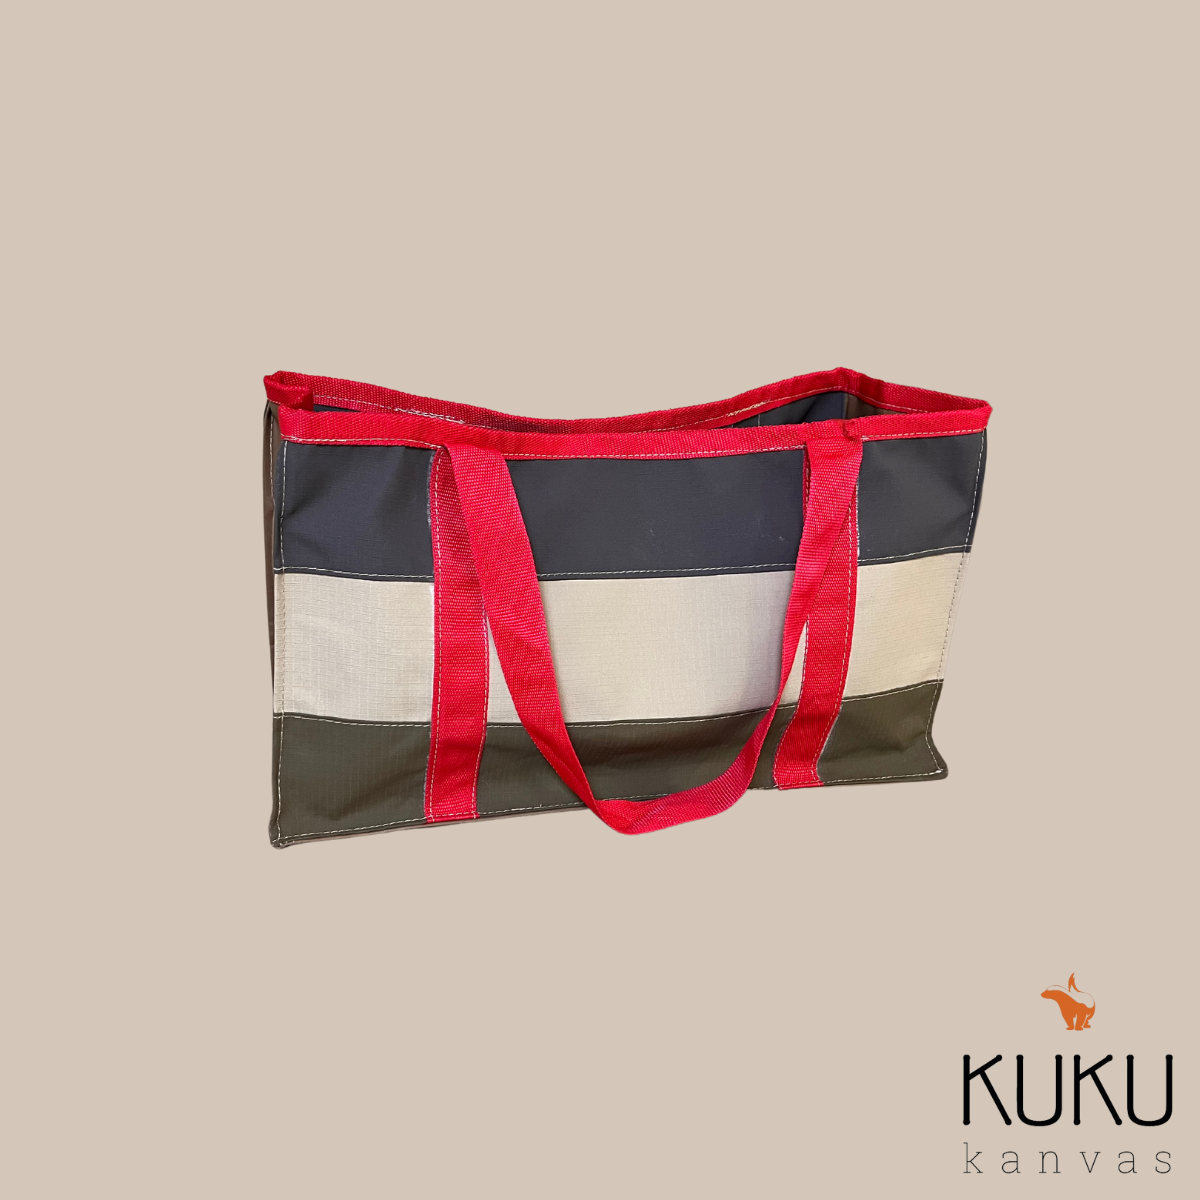 A striped tote bag with red handles from kuku canvas